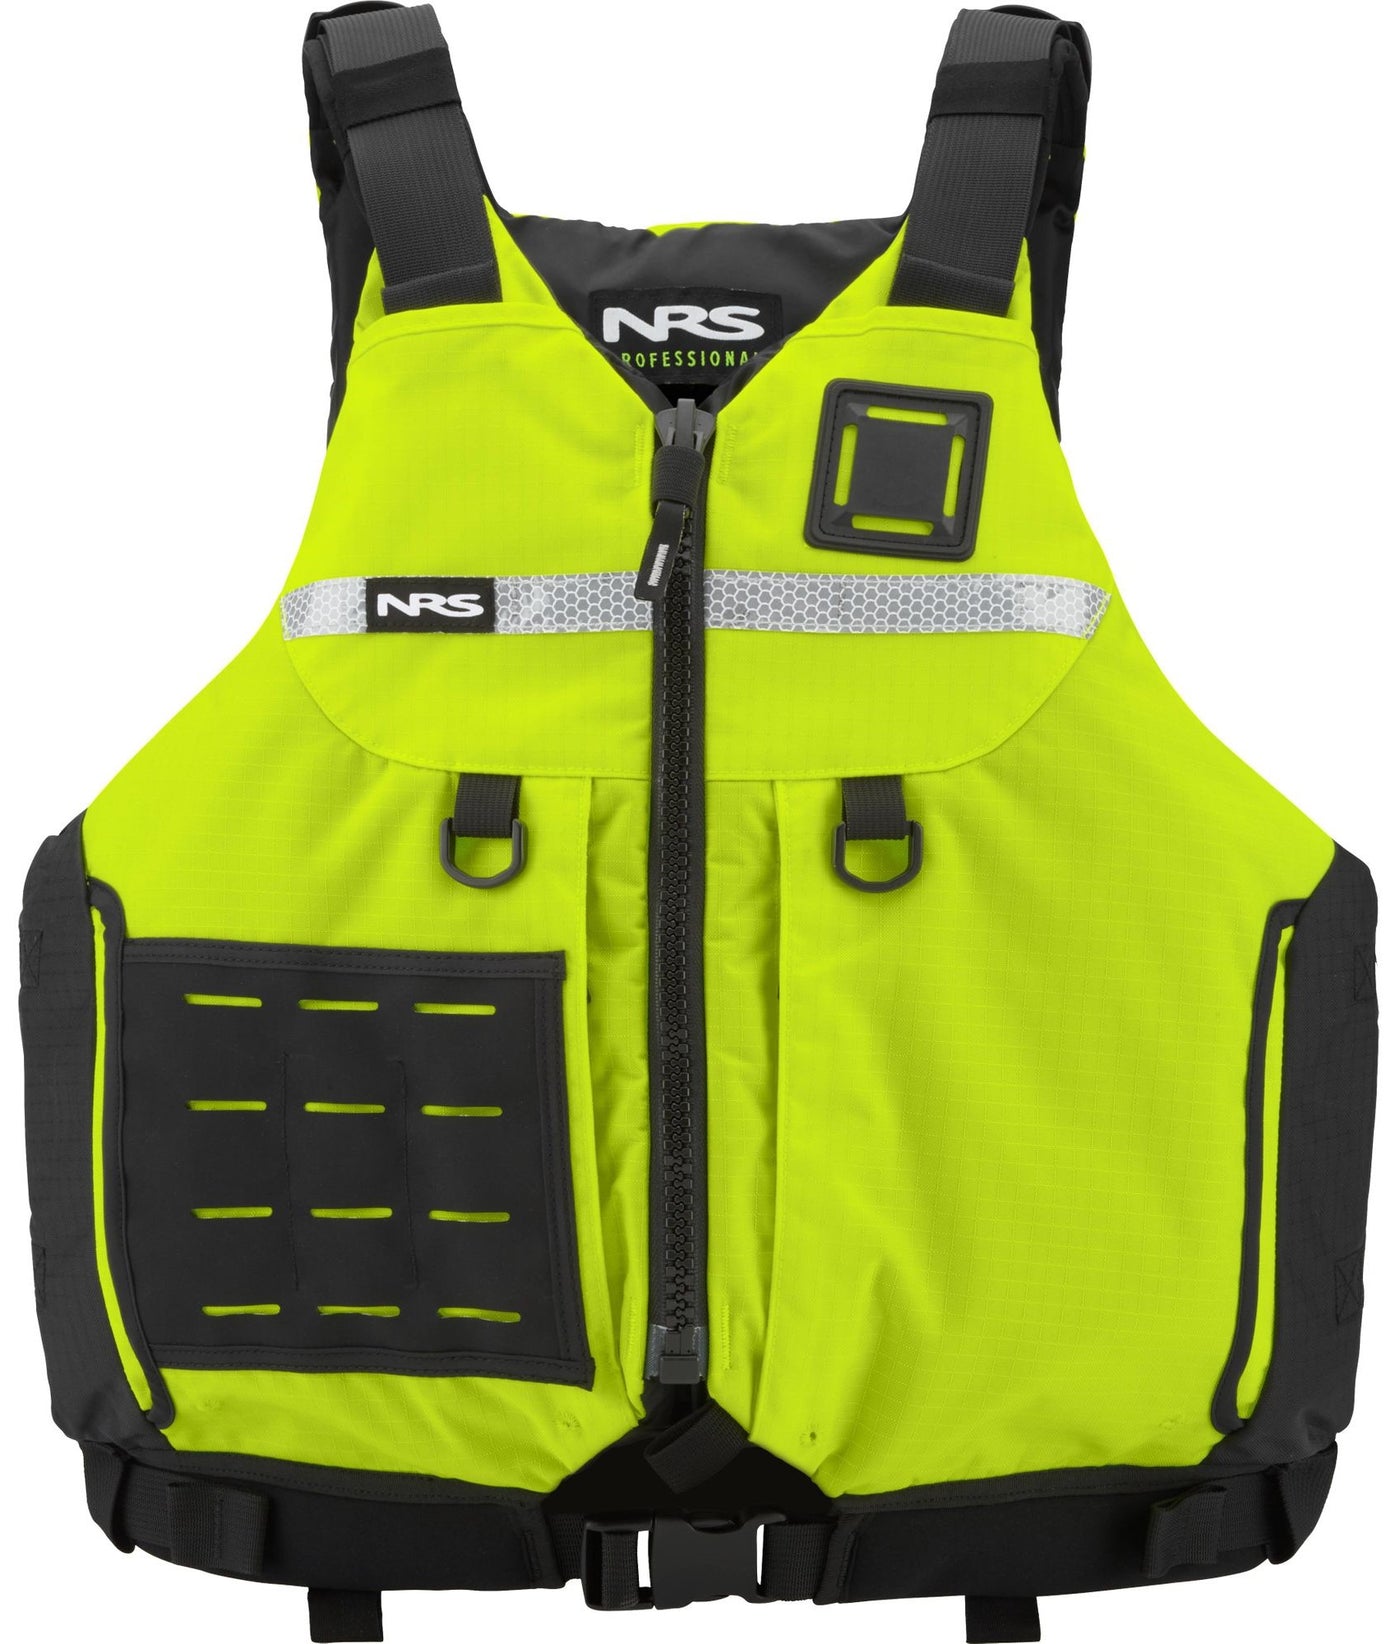 NRS Big Water Guide PFD, XS/M - Safety Yellow